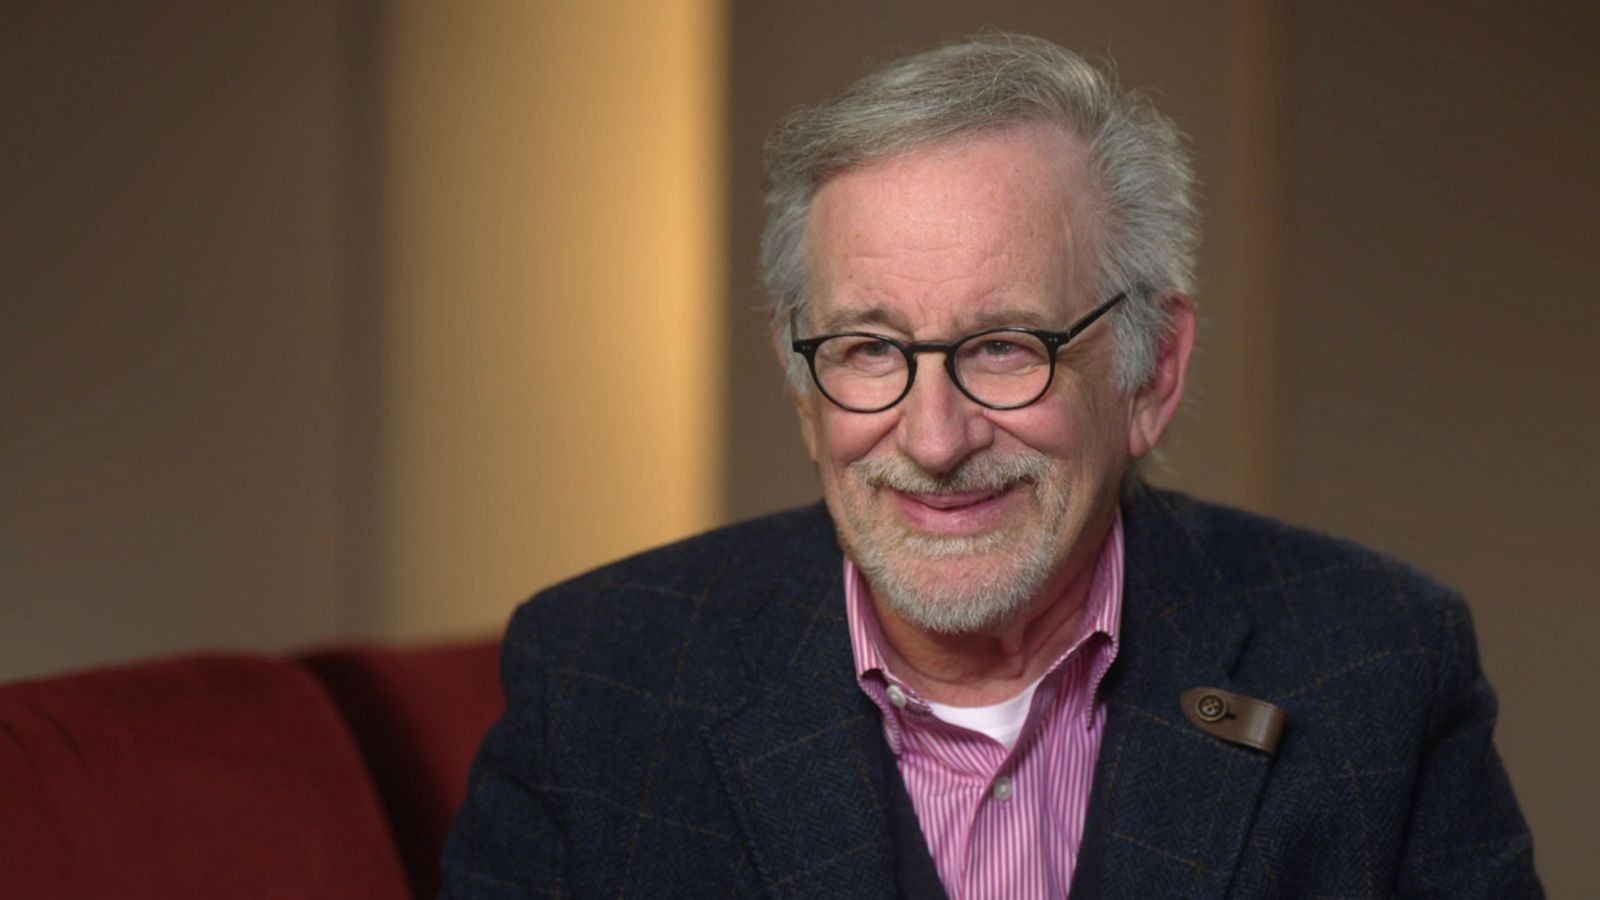 Steven Spielberg in an interview with ABC News